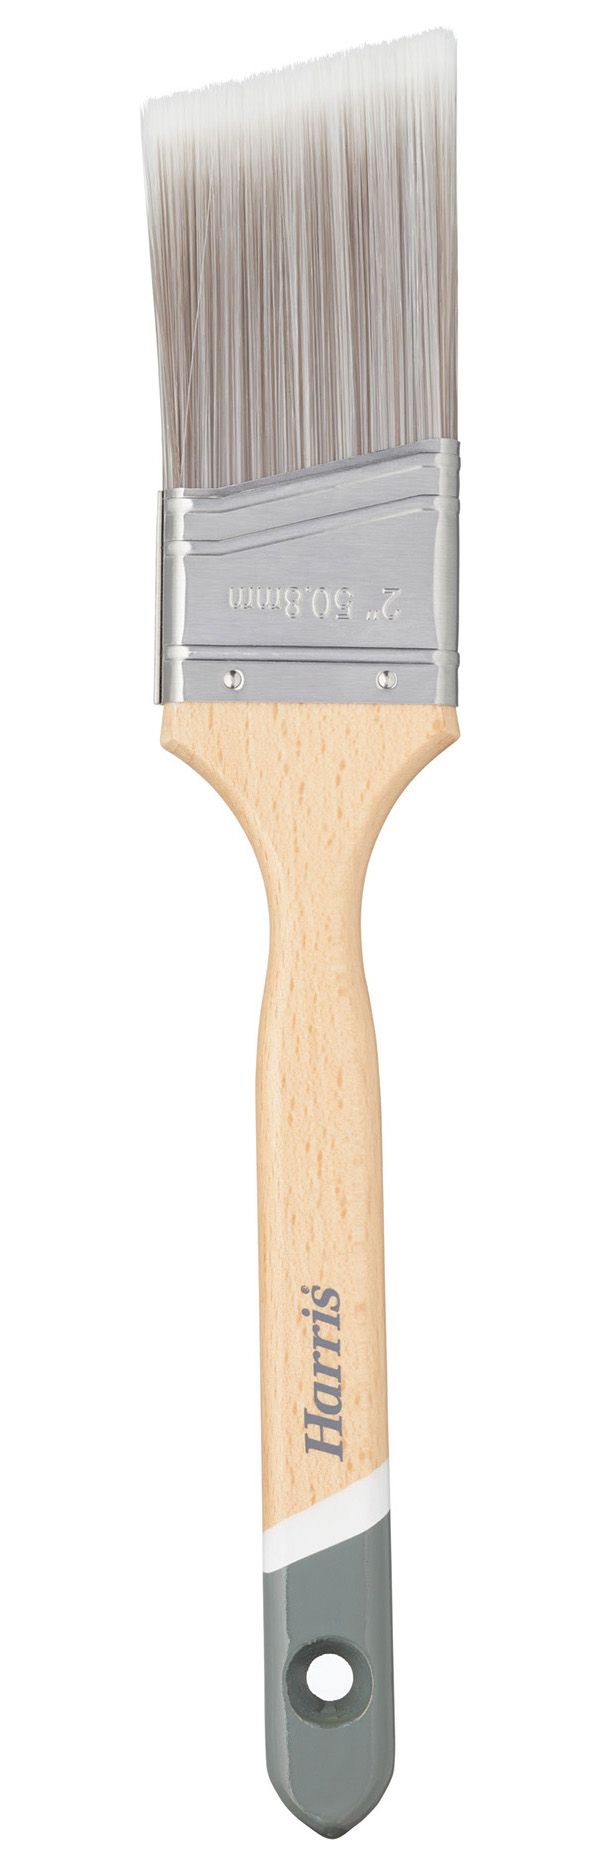 Image of Harris Ultimate Angled Reach Brush - 2in